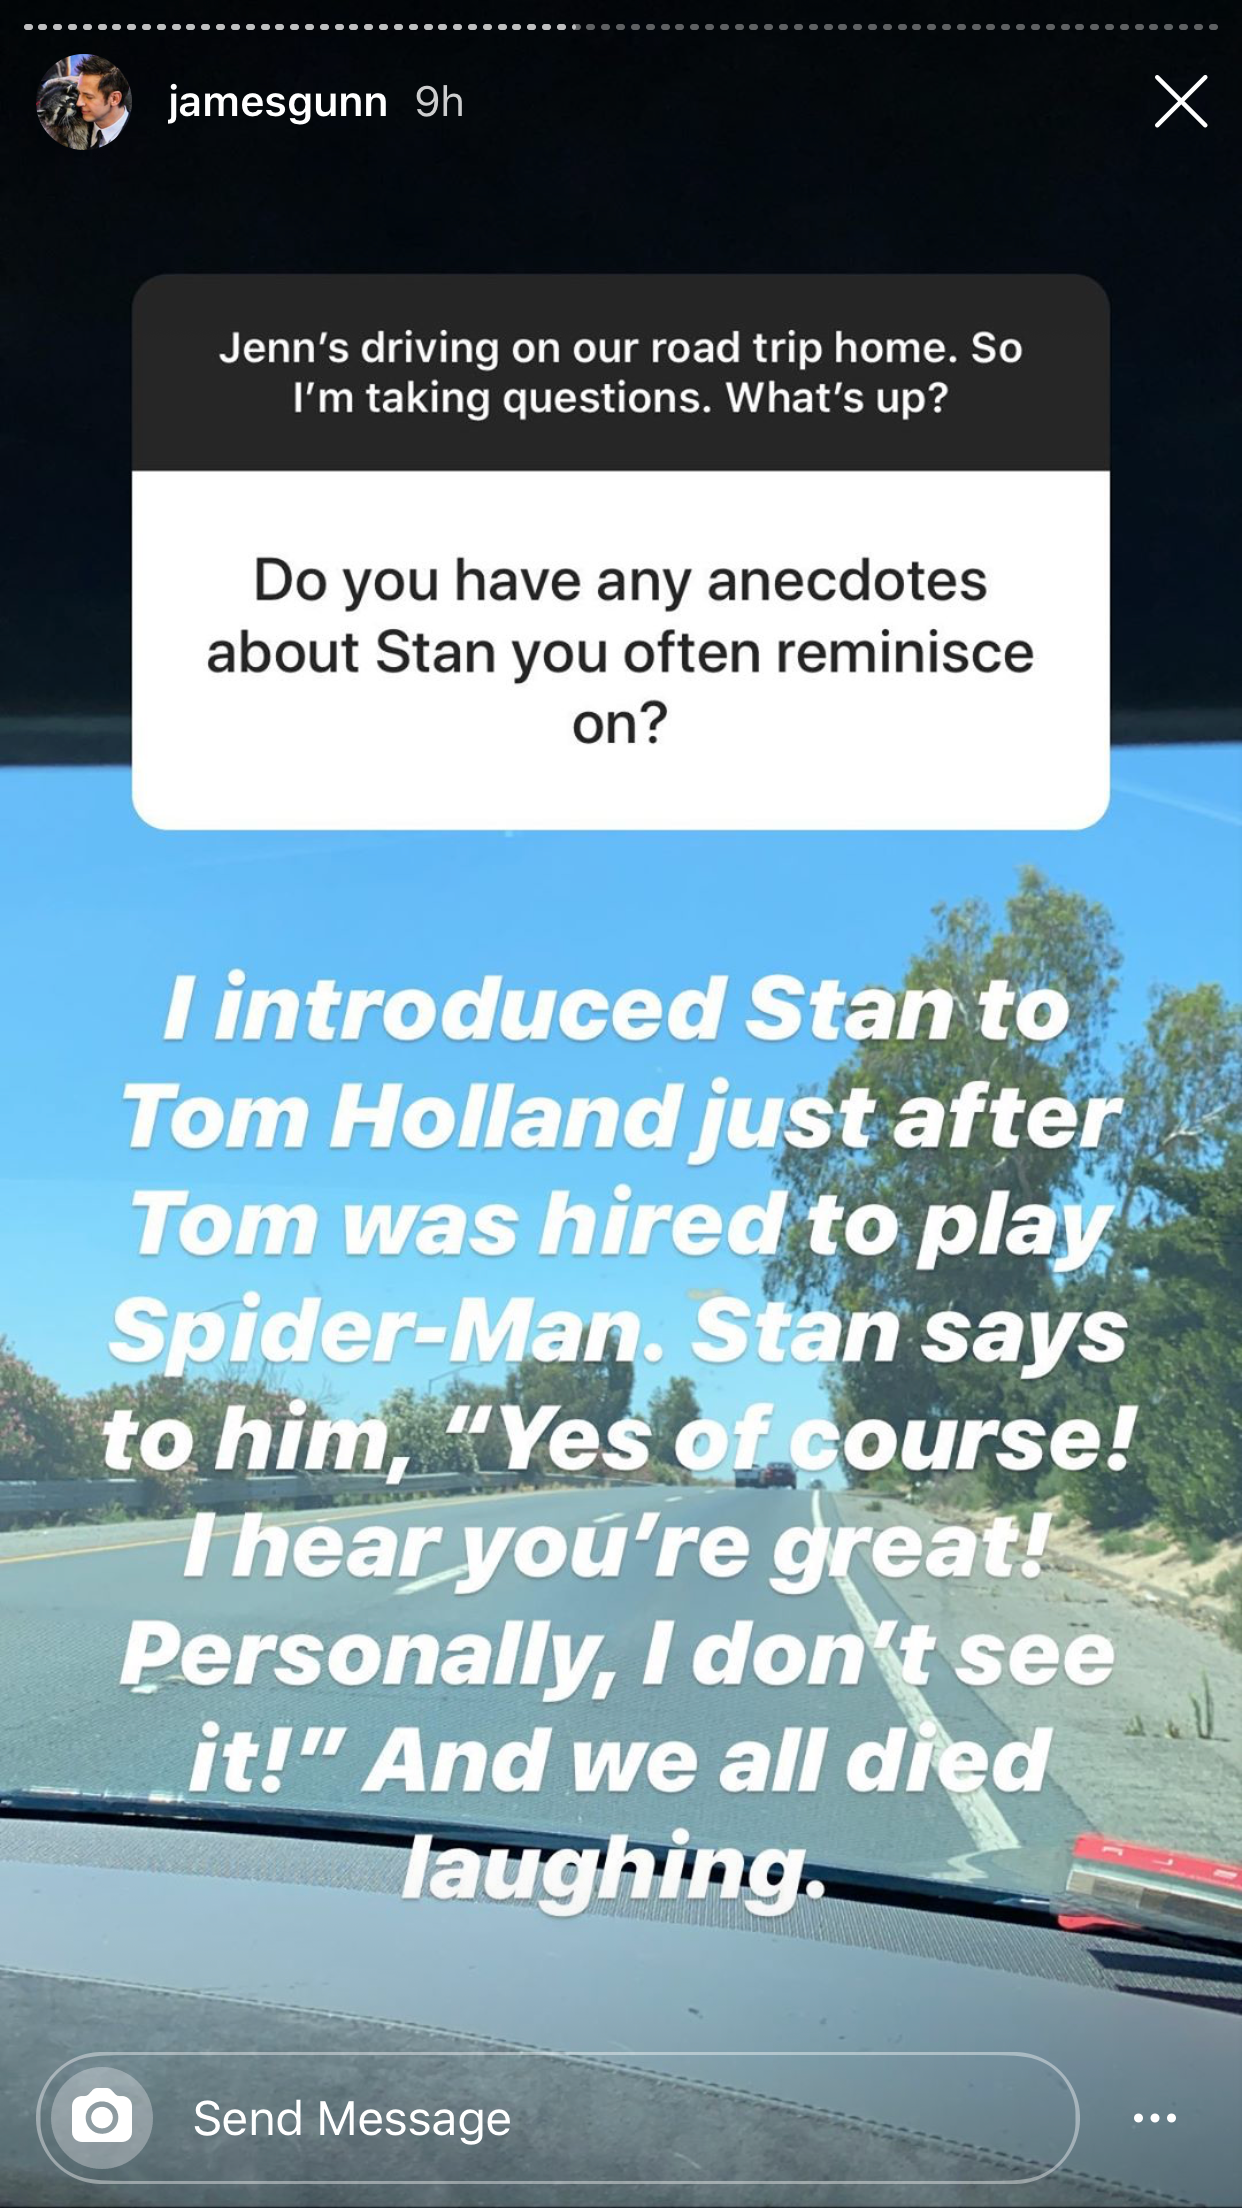 James Gunn introduces Tom Holland to Stan Lee from Instagram